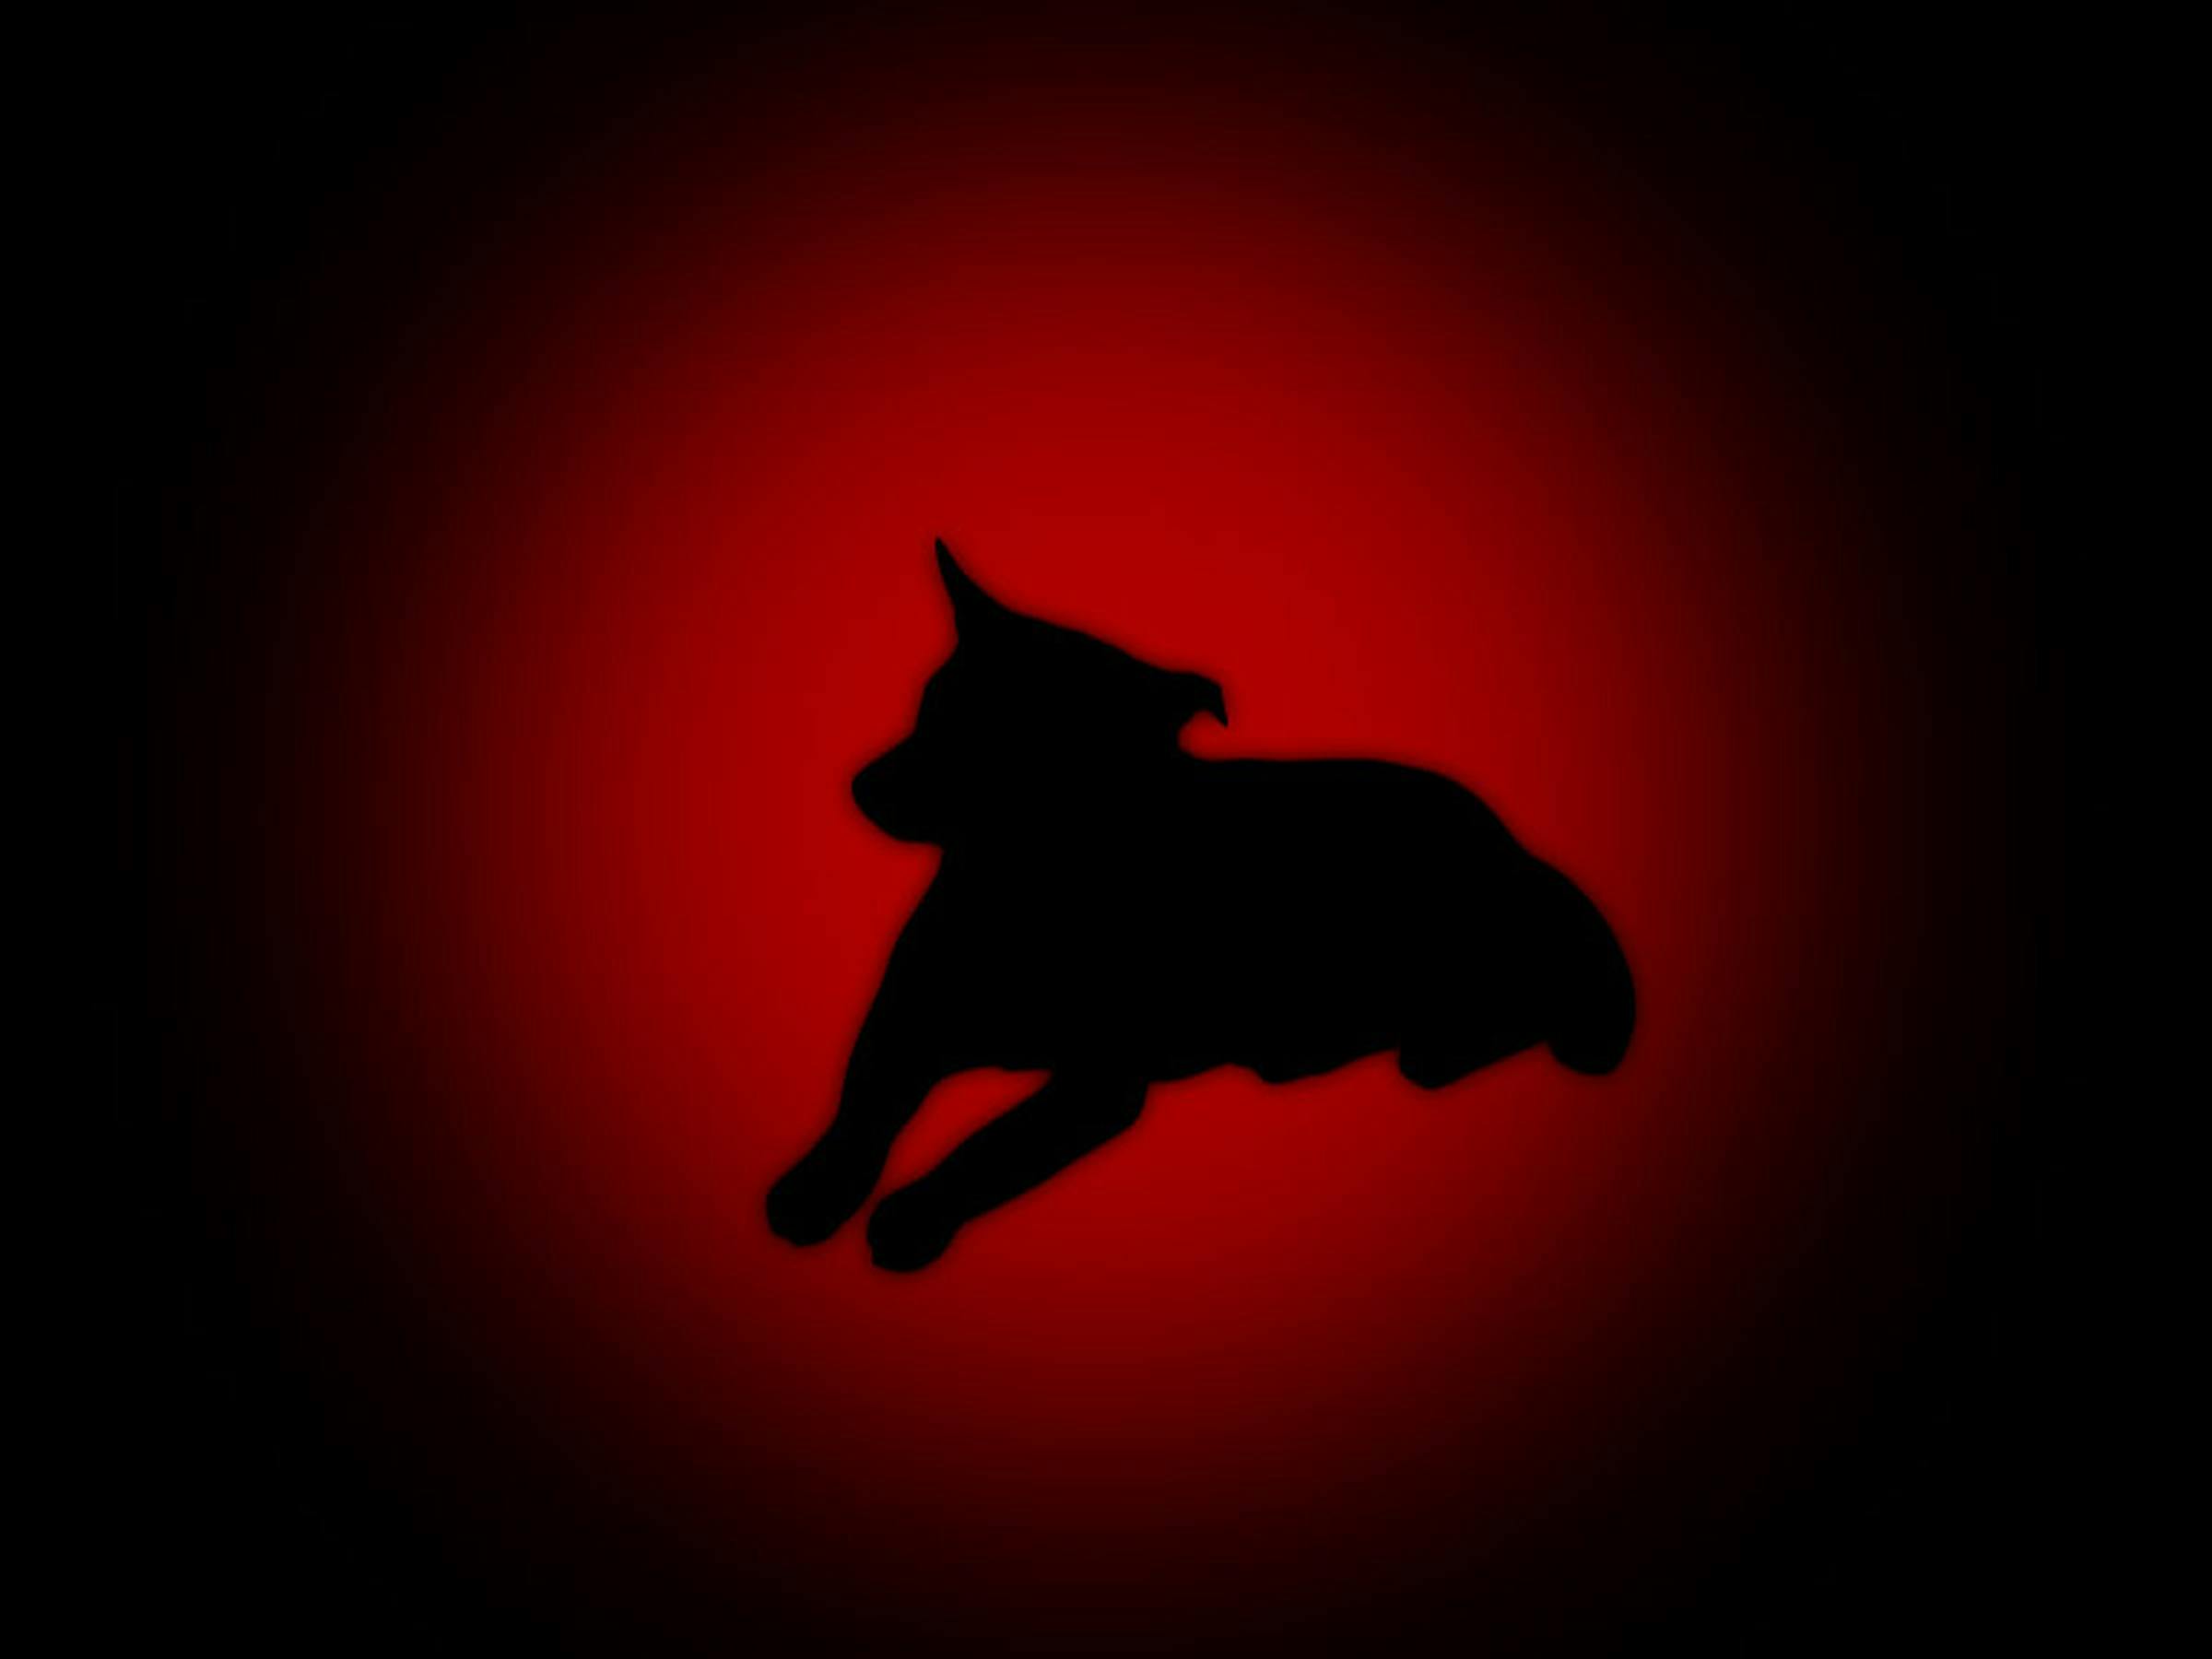 the side view of a black dog on a red and black background